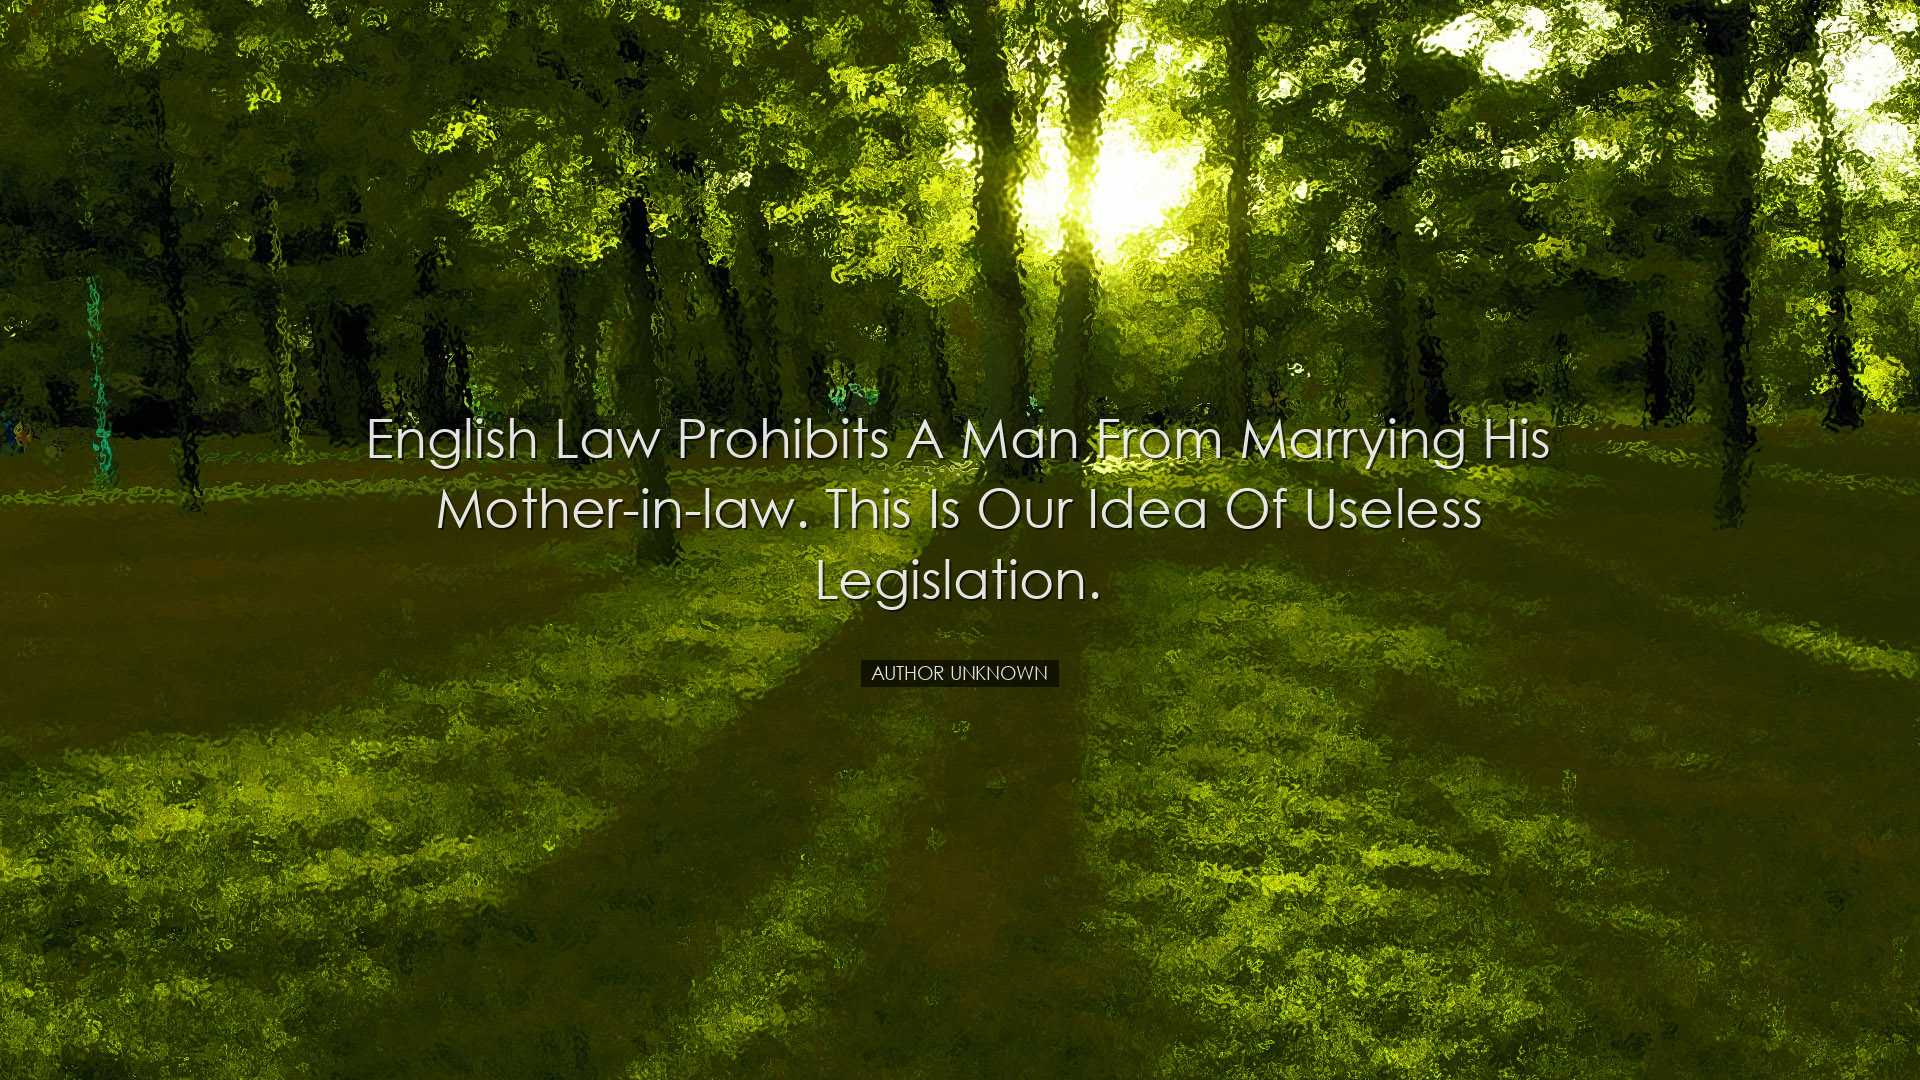 English Law prohibits a man from marrying his mother-in-law. This